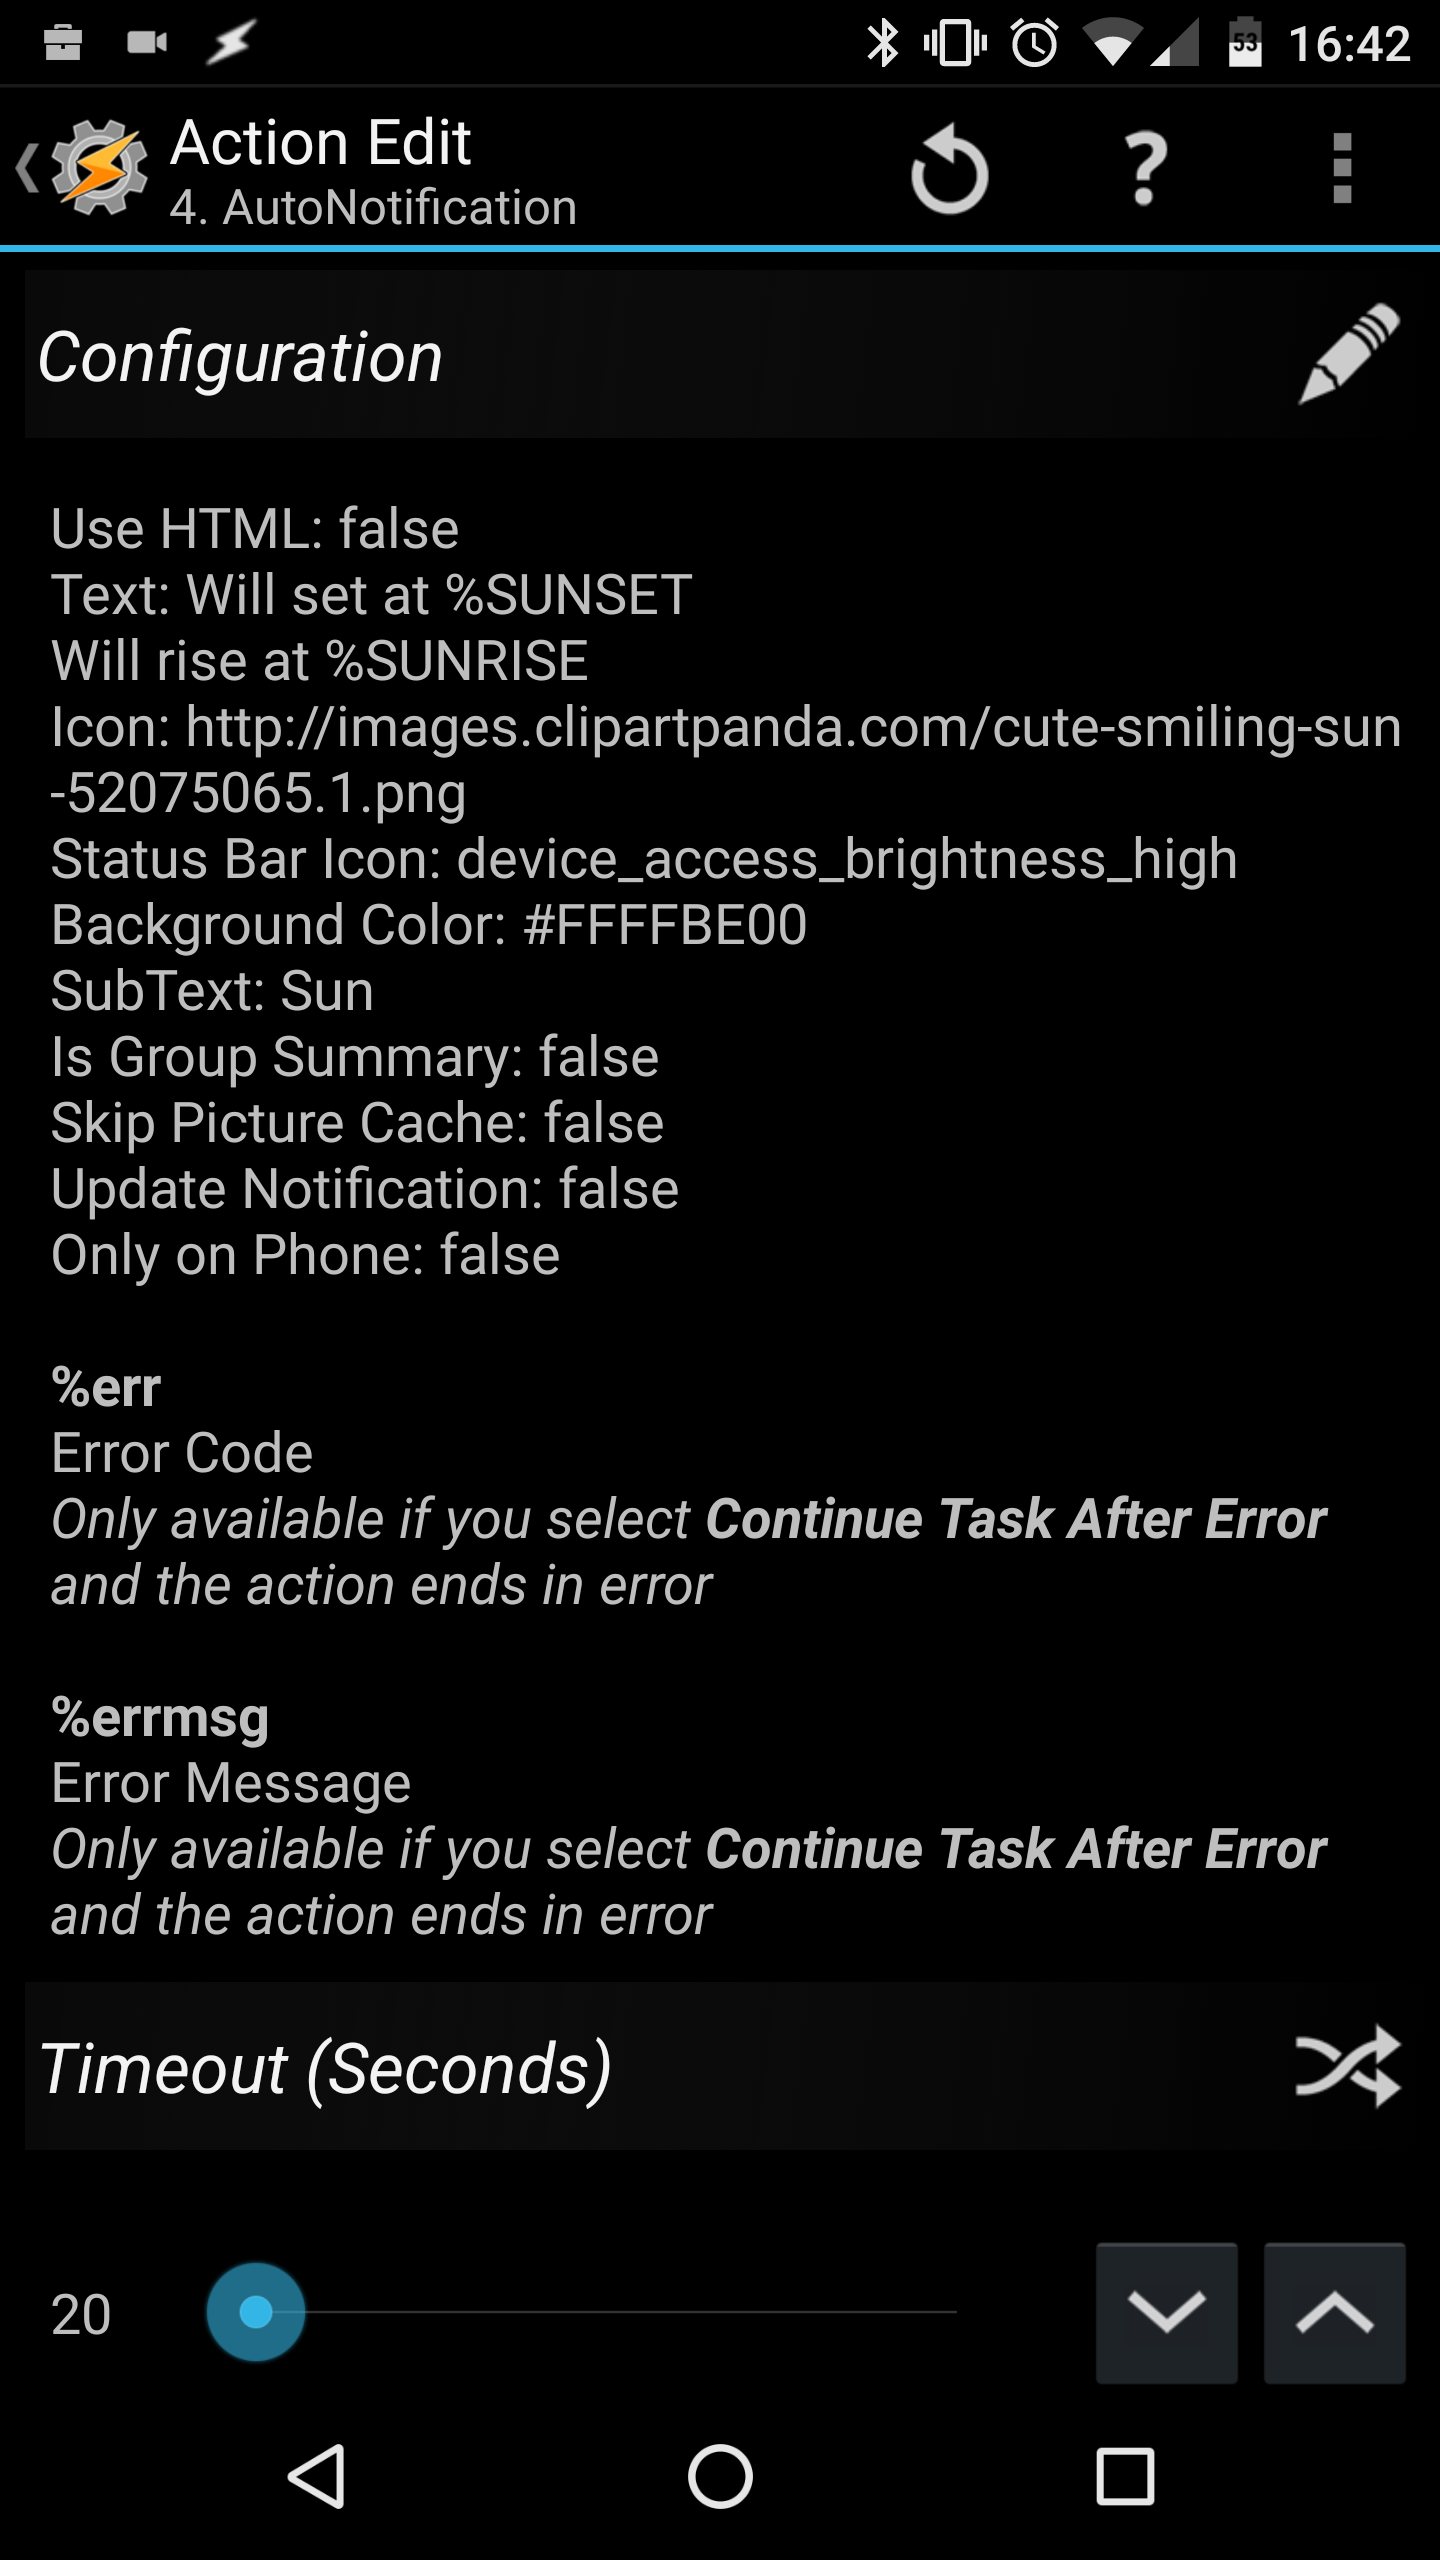 Sunrise and Sunset Confirmation Notification